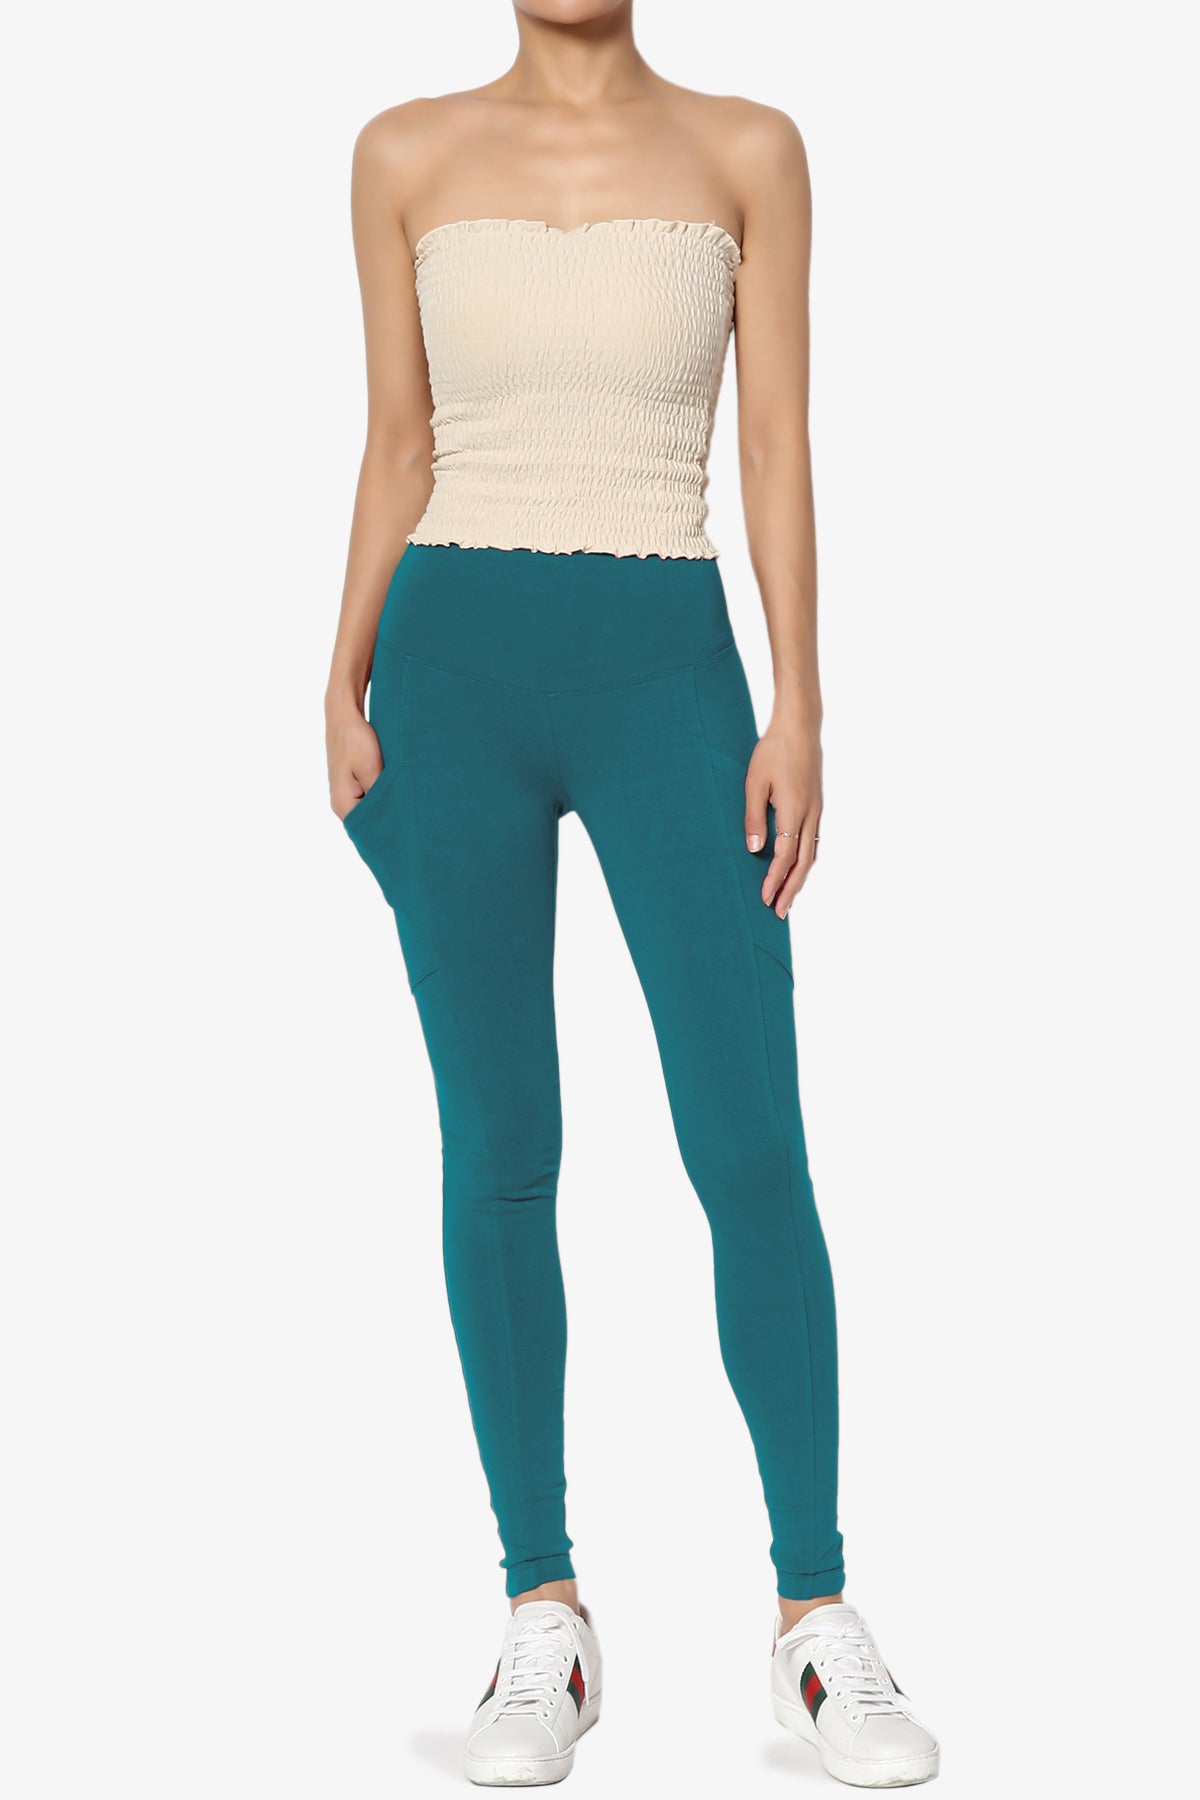 Ansley Luxe Cotton Leggings with Pockets TEAL_6